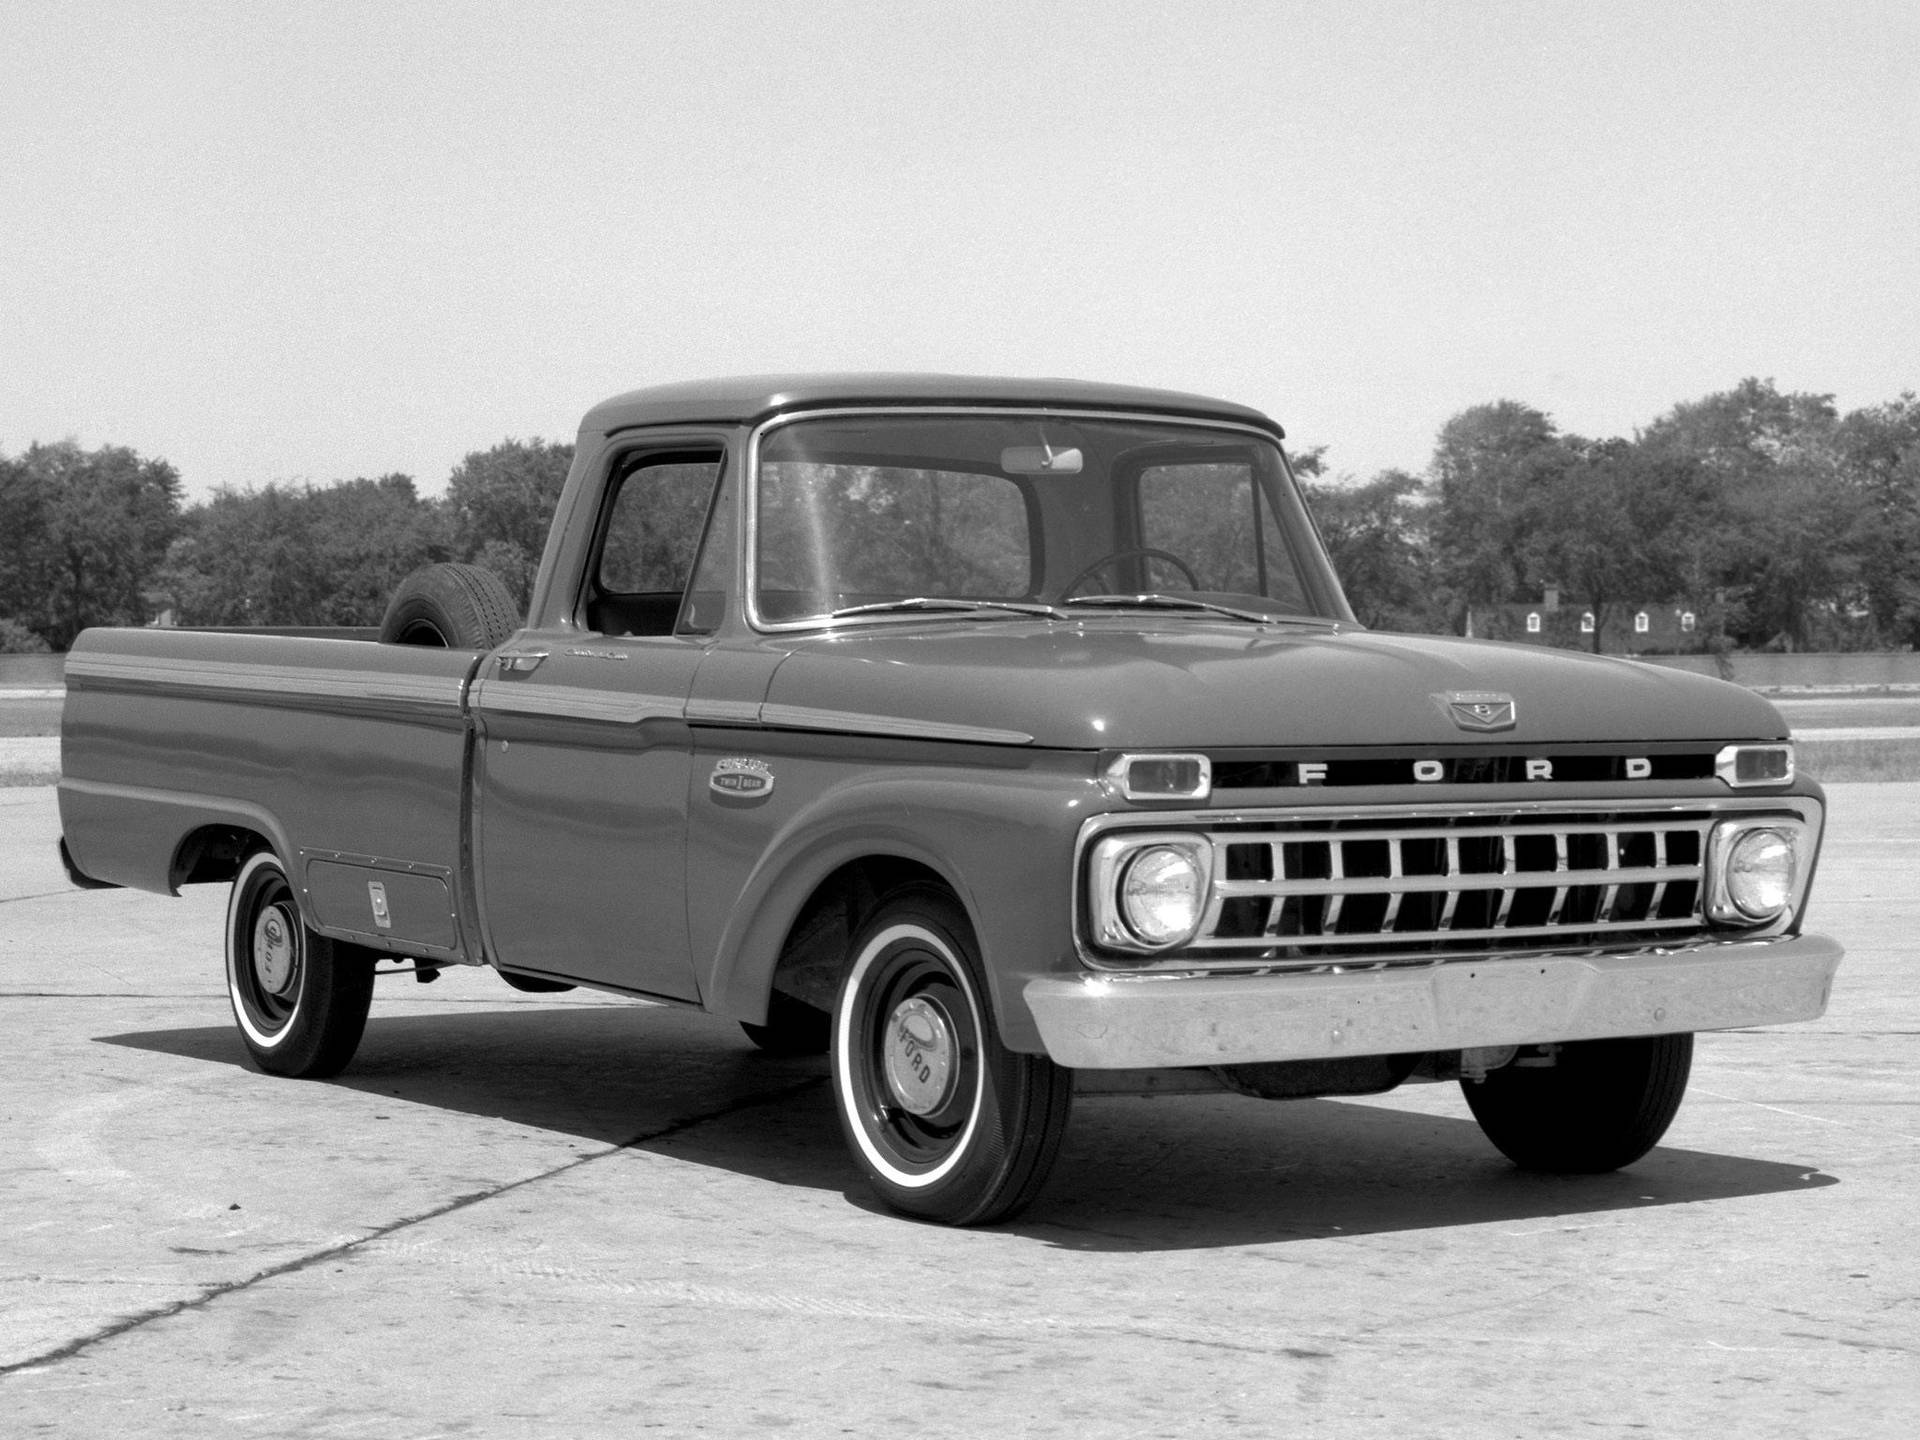 Monochrome Old Ford Truck Background